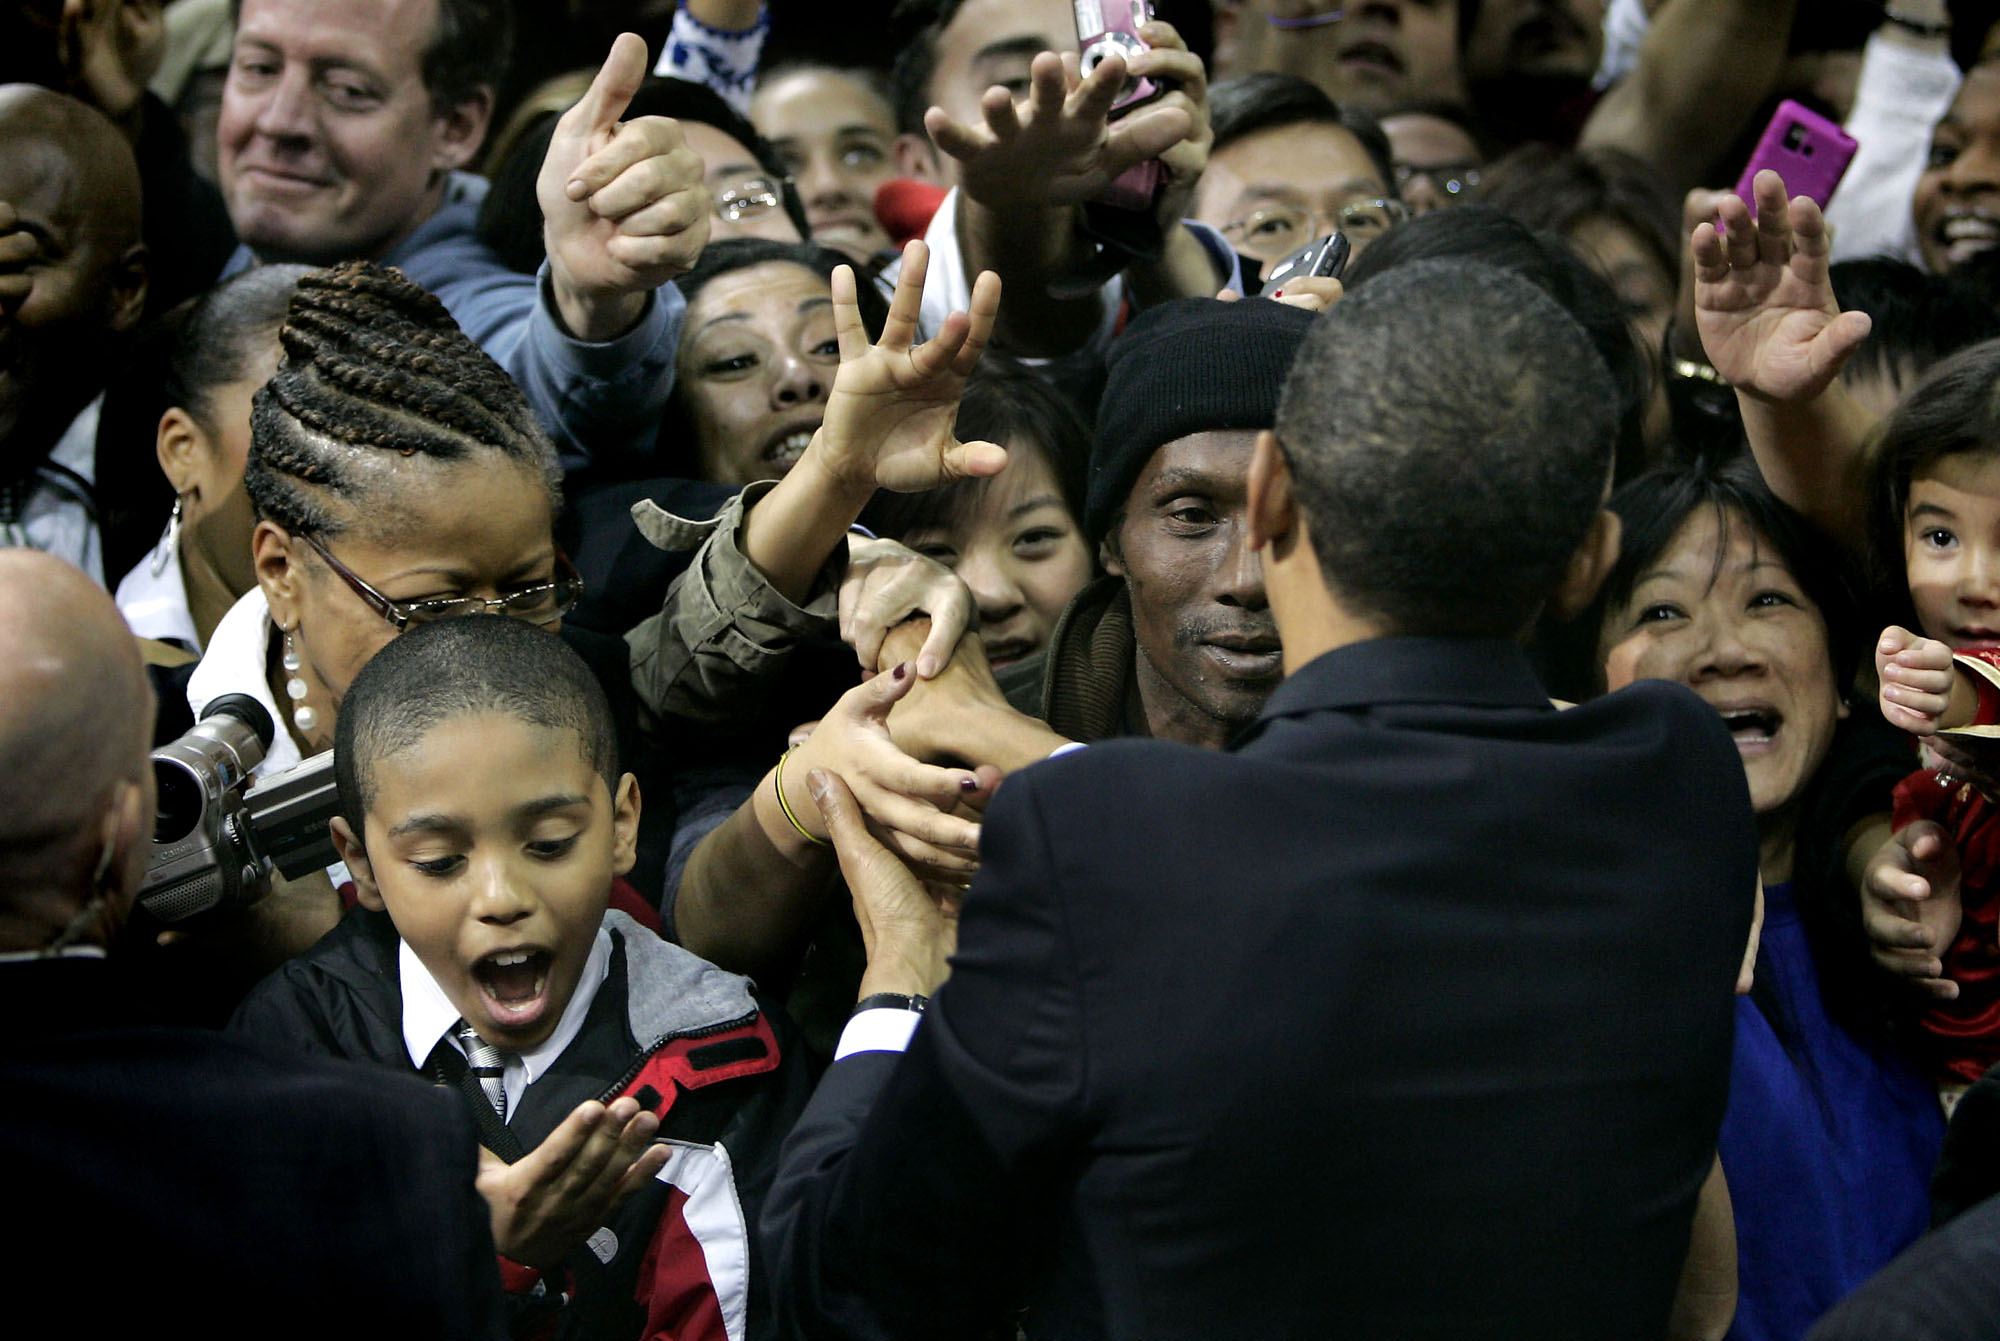 A young boy looks to his hand in awe after shaking it with U.S. President Barack Obama during a Newark, NJ campaign rally for NJ Governor Jon Corzine.  Photographed for The Star-Ledger